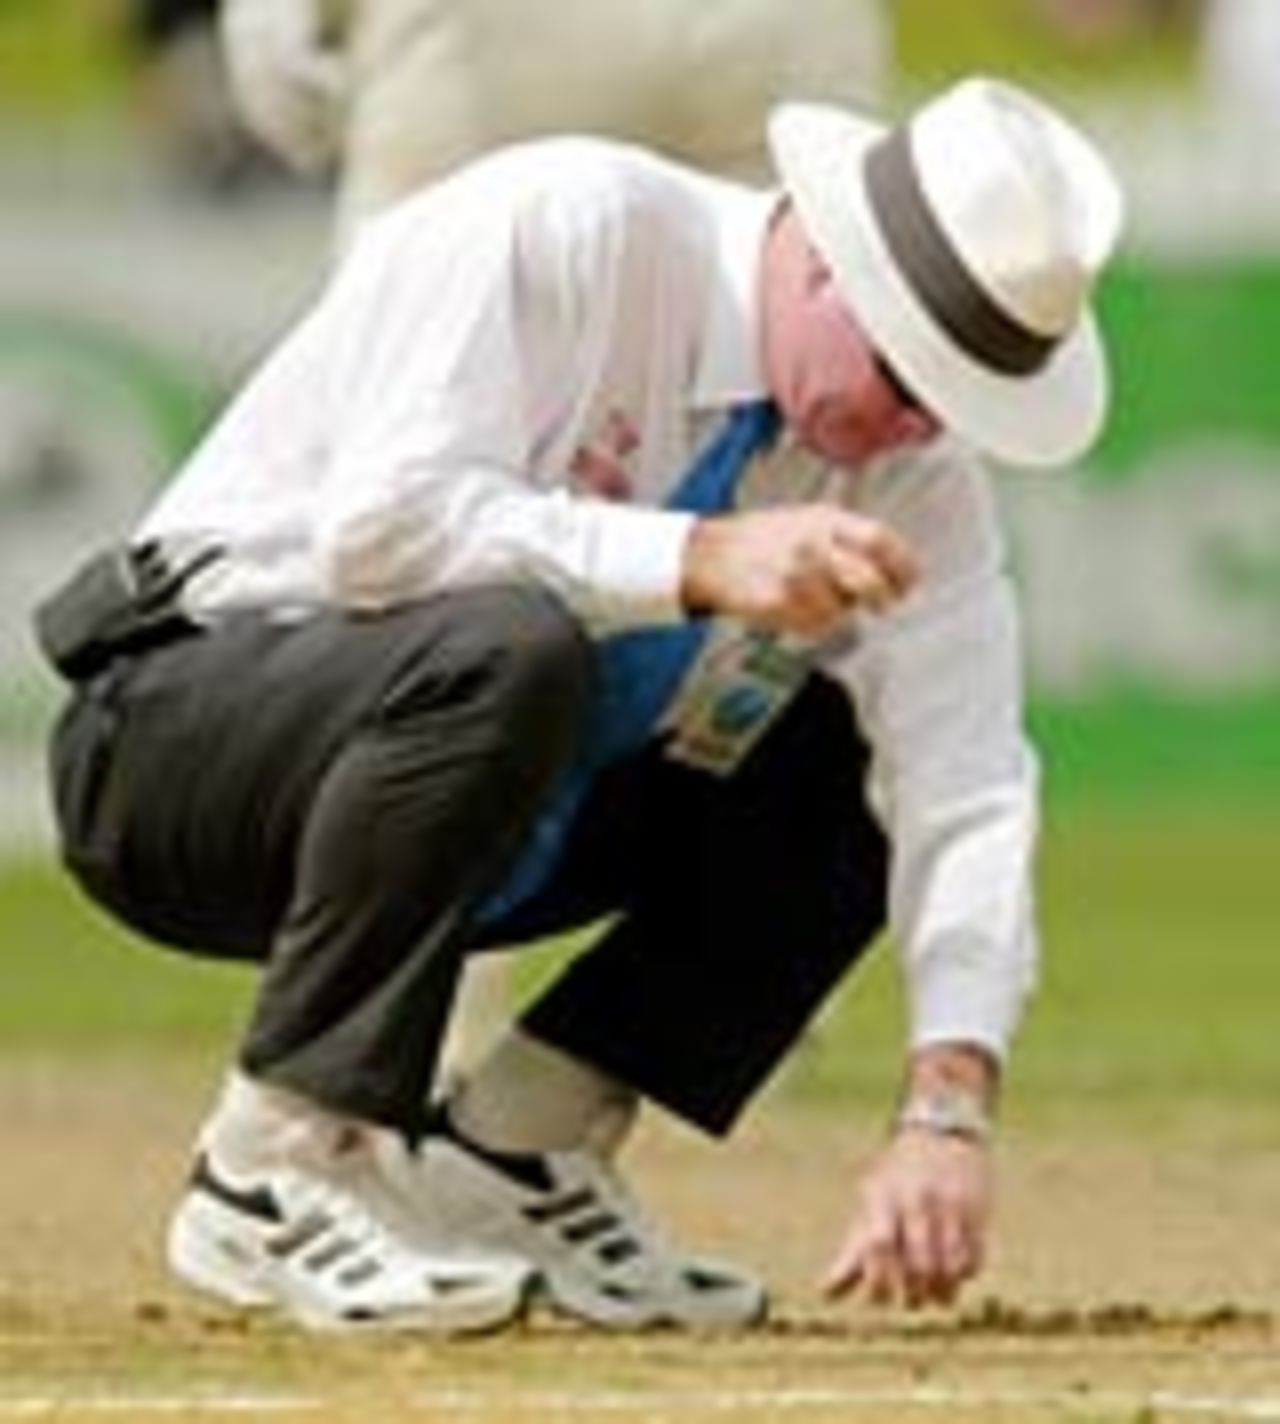 Russell Tiffin inspects the deteriorating pitch, New Zealand v South Africa, Hamilton, 1st Test, March 13, 2004